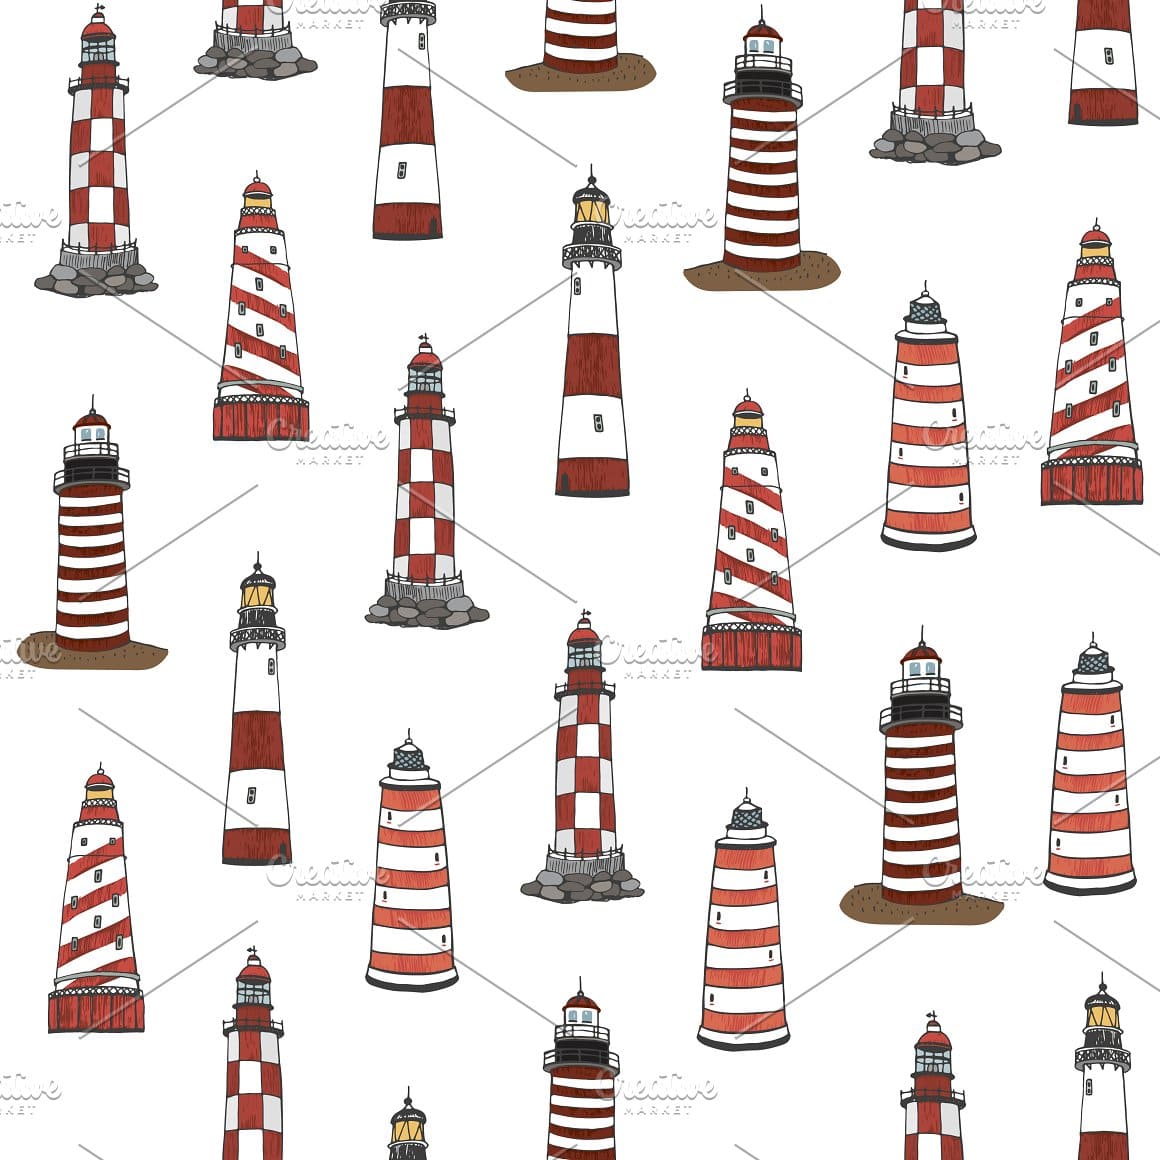 Lighthouses in a red stripe and a cell are drawn on a white background.